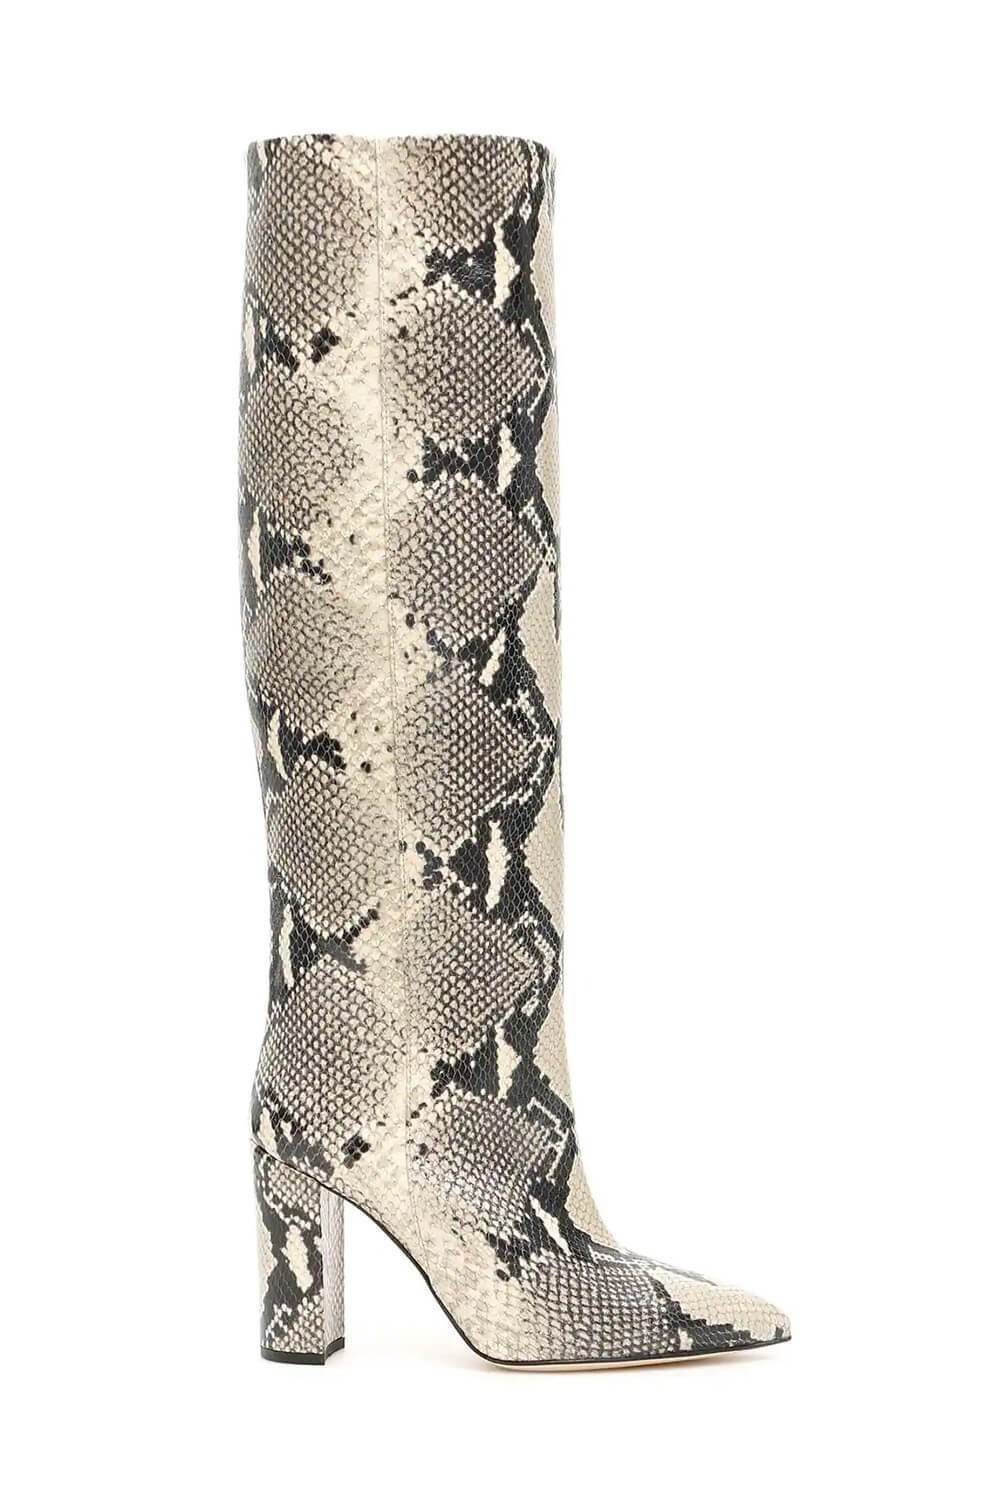 Python Effect Knee High Boots – NUDE SUEDE